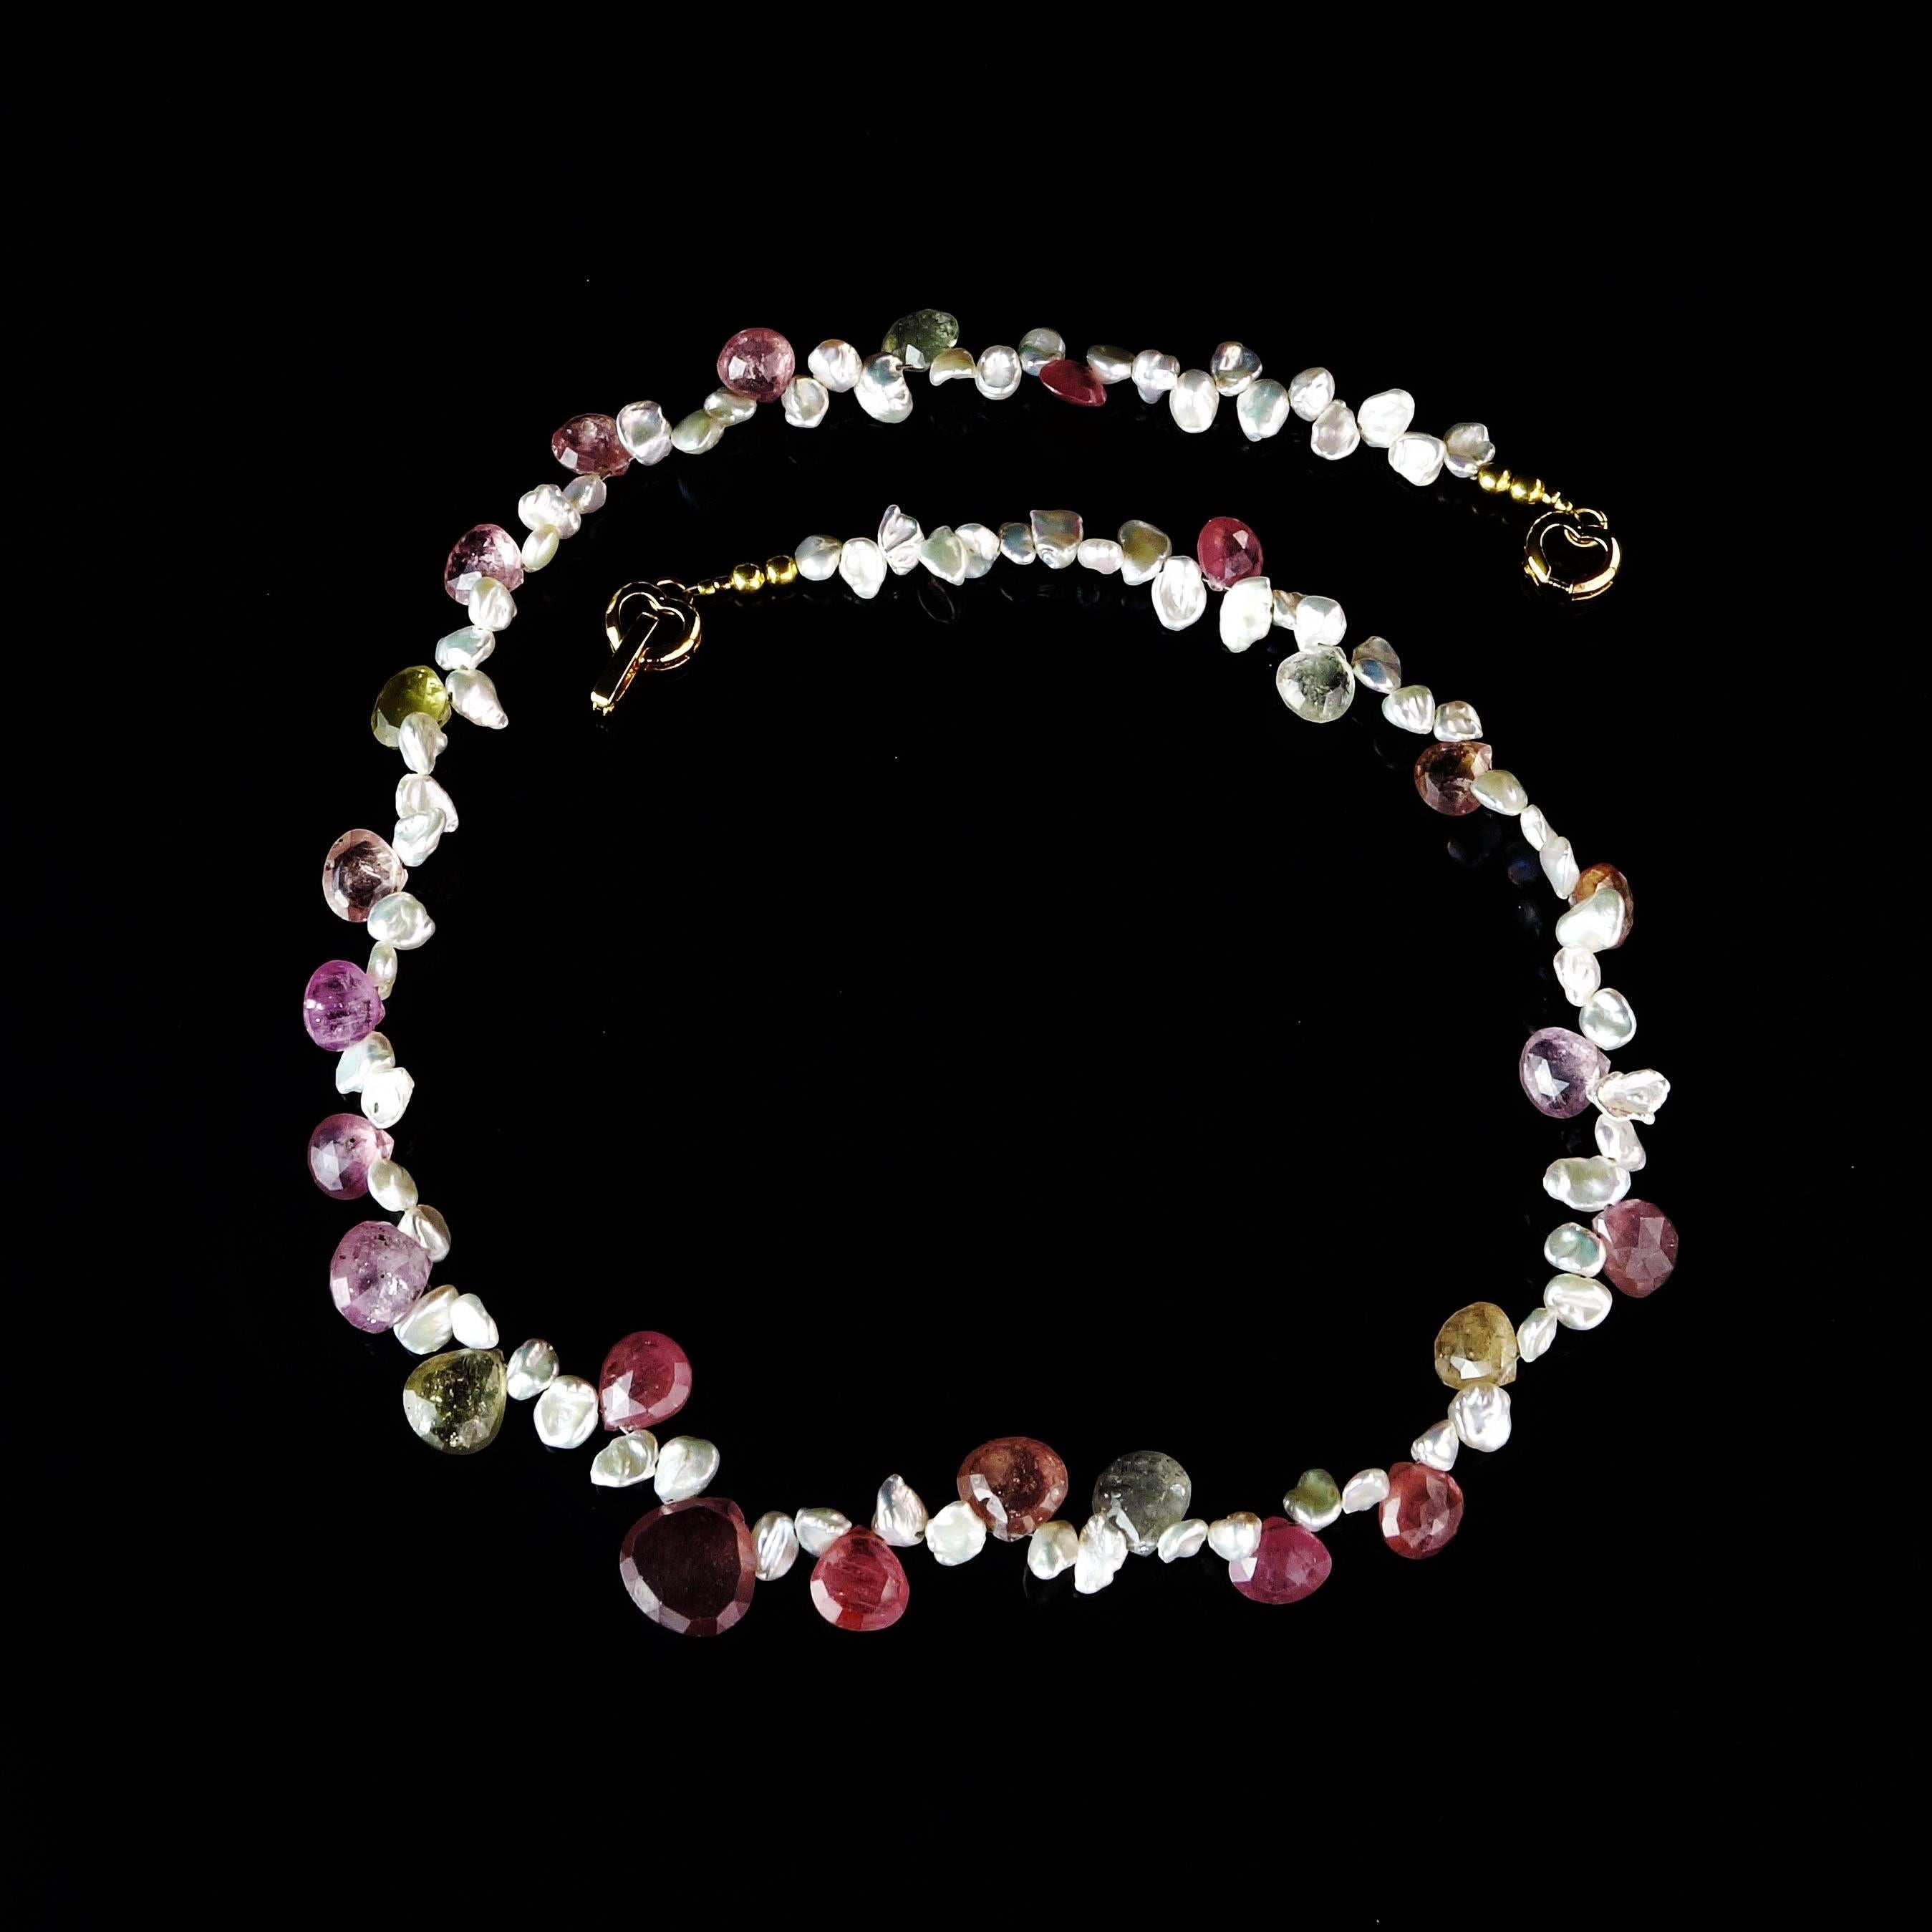 Women's Gemjunky Choker of Multi-Color Natural Sapphire Biolettes and Freshwater Pearls